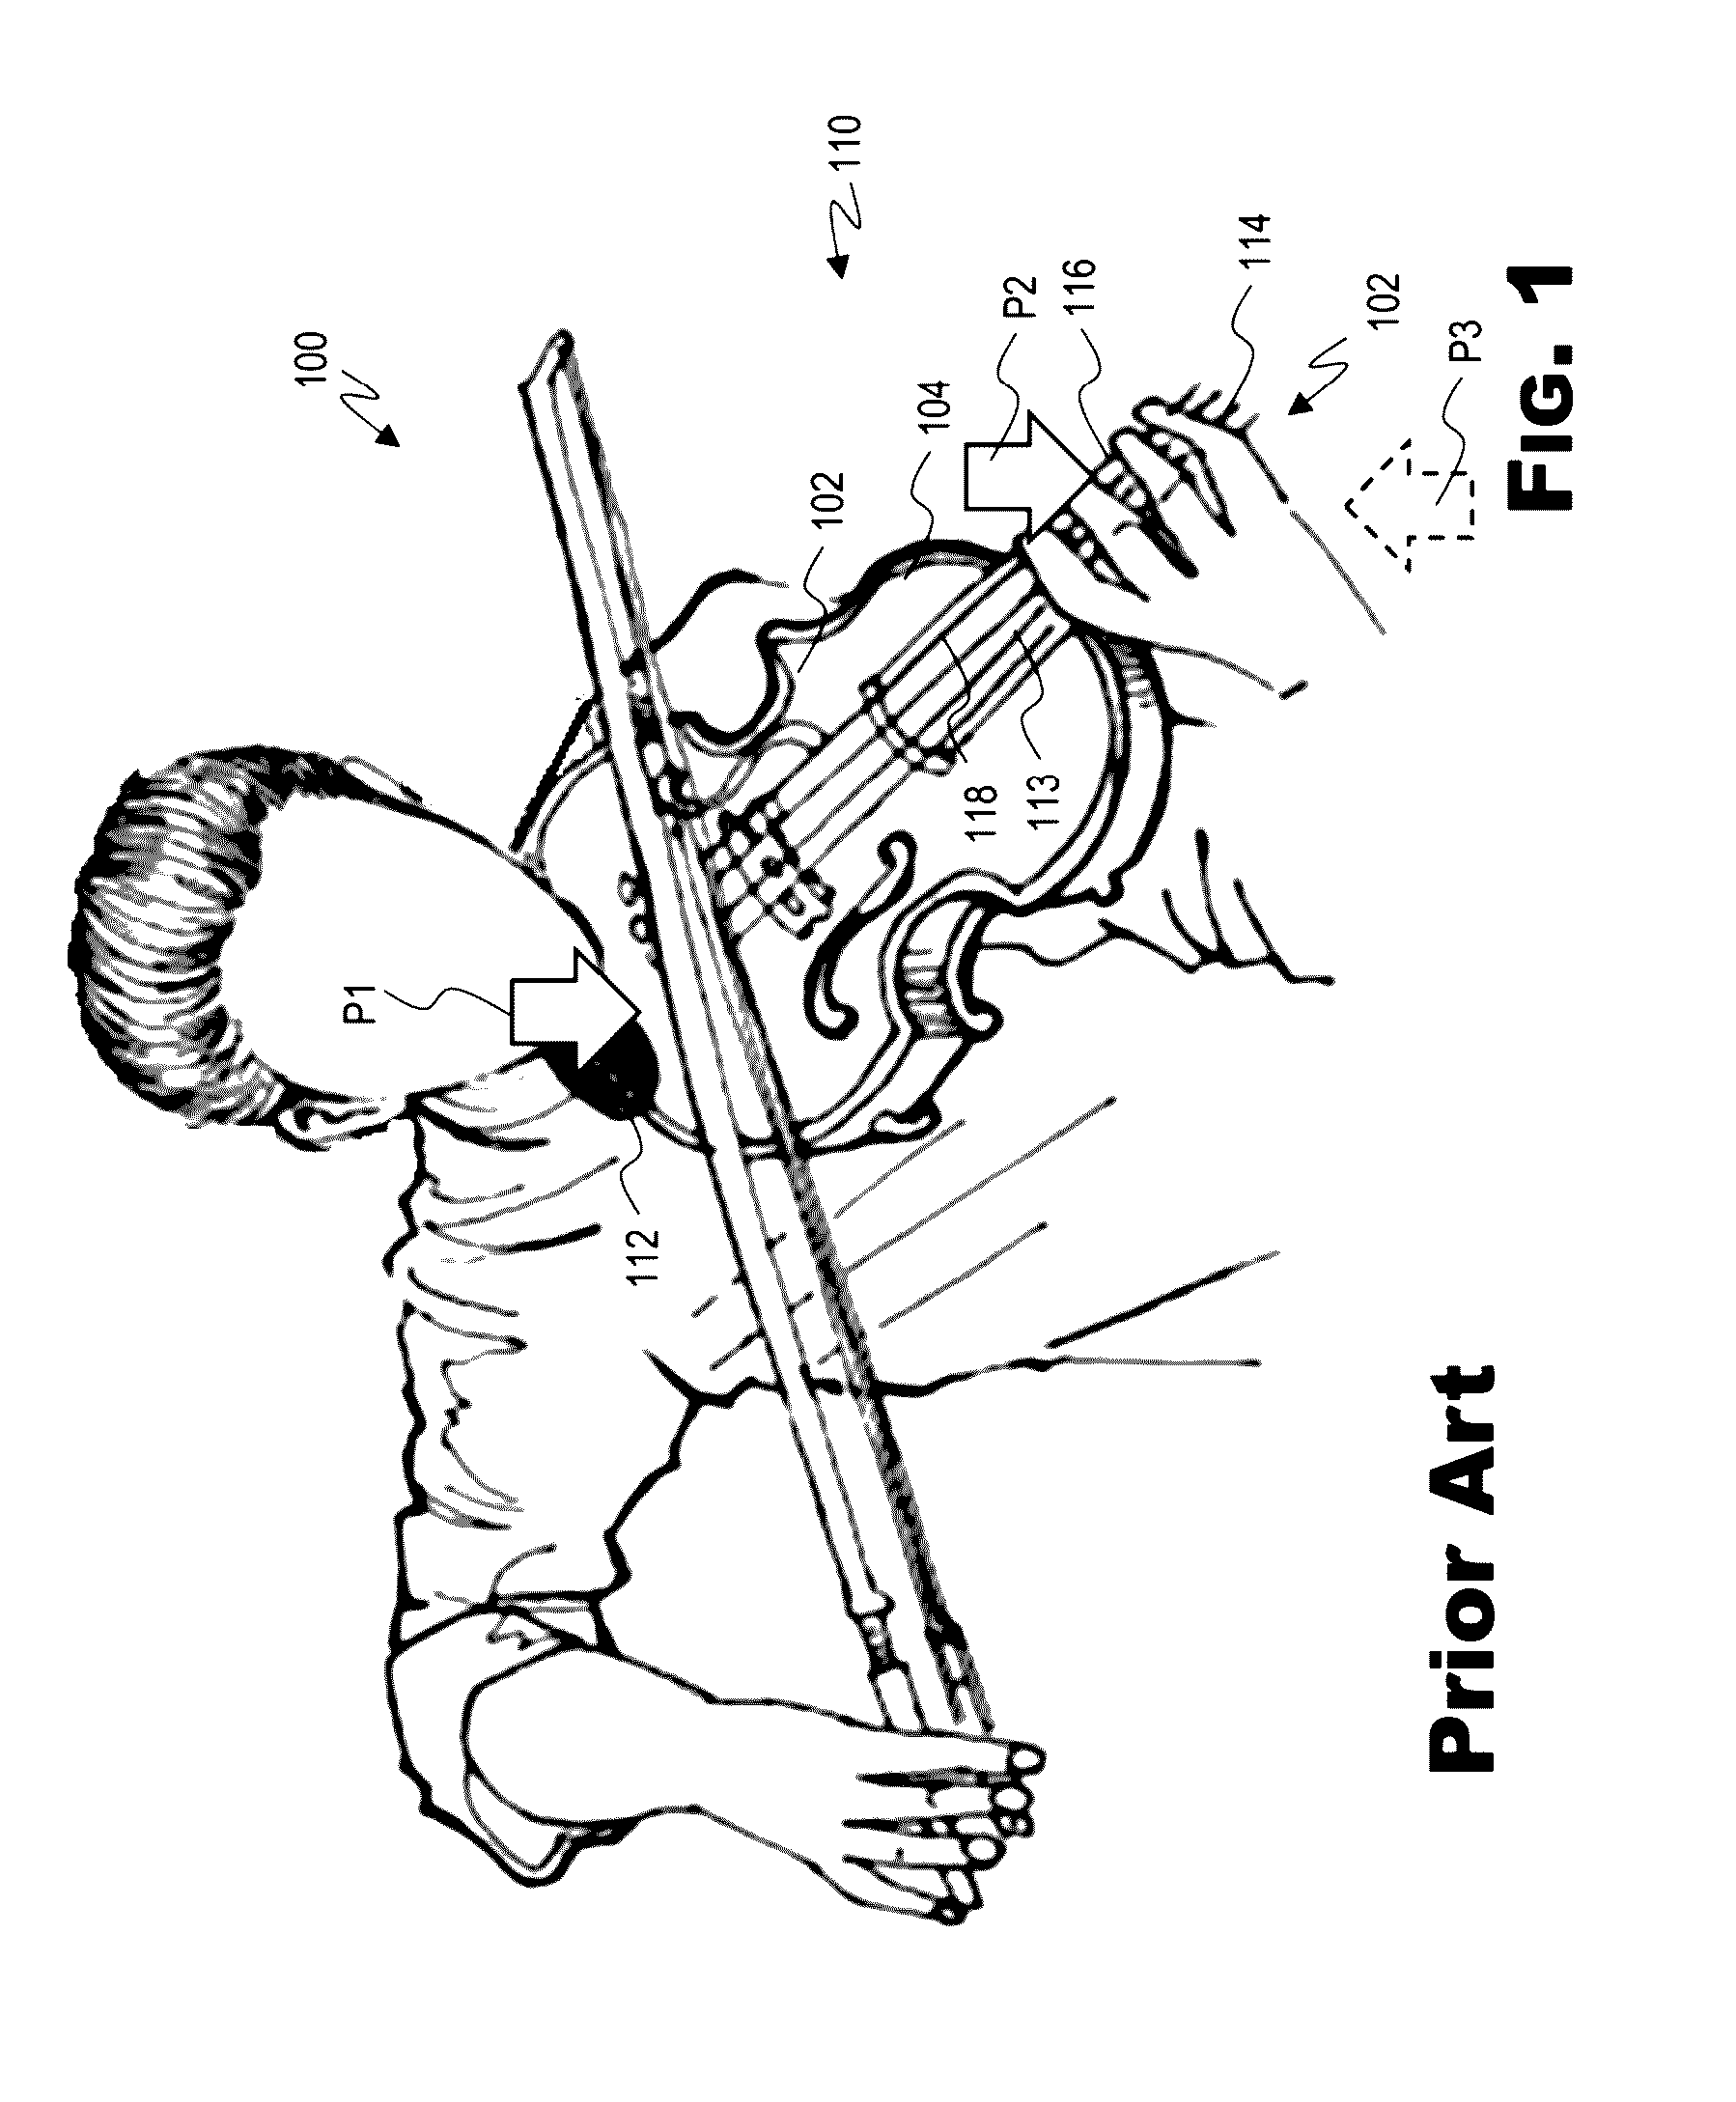 Stringed musical instrument performance feedback system and method